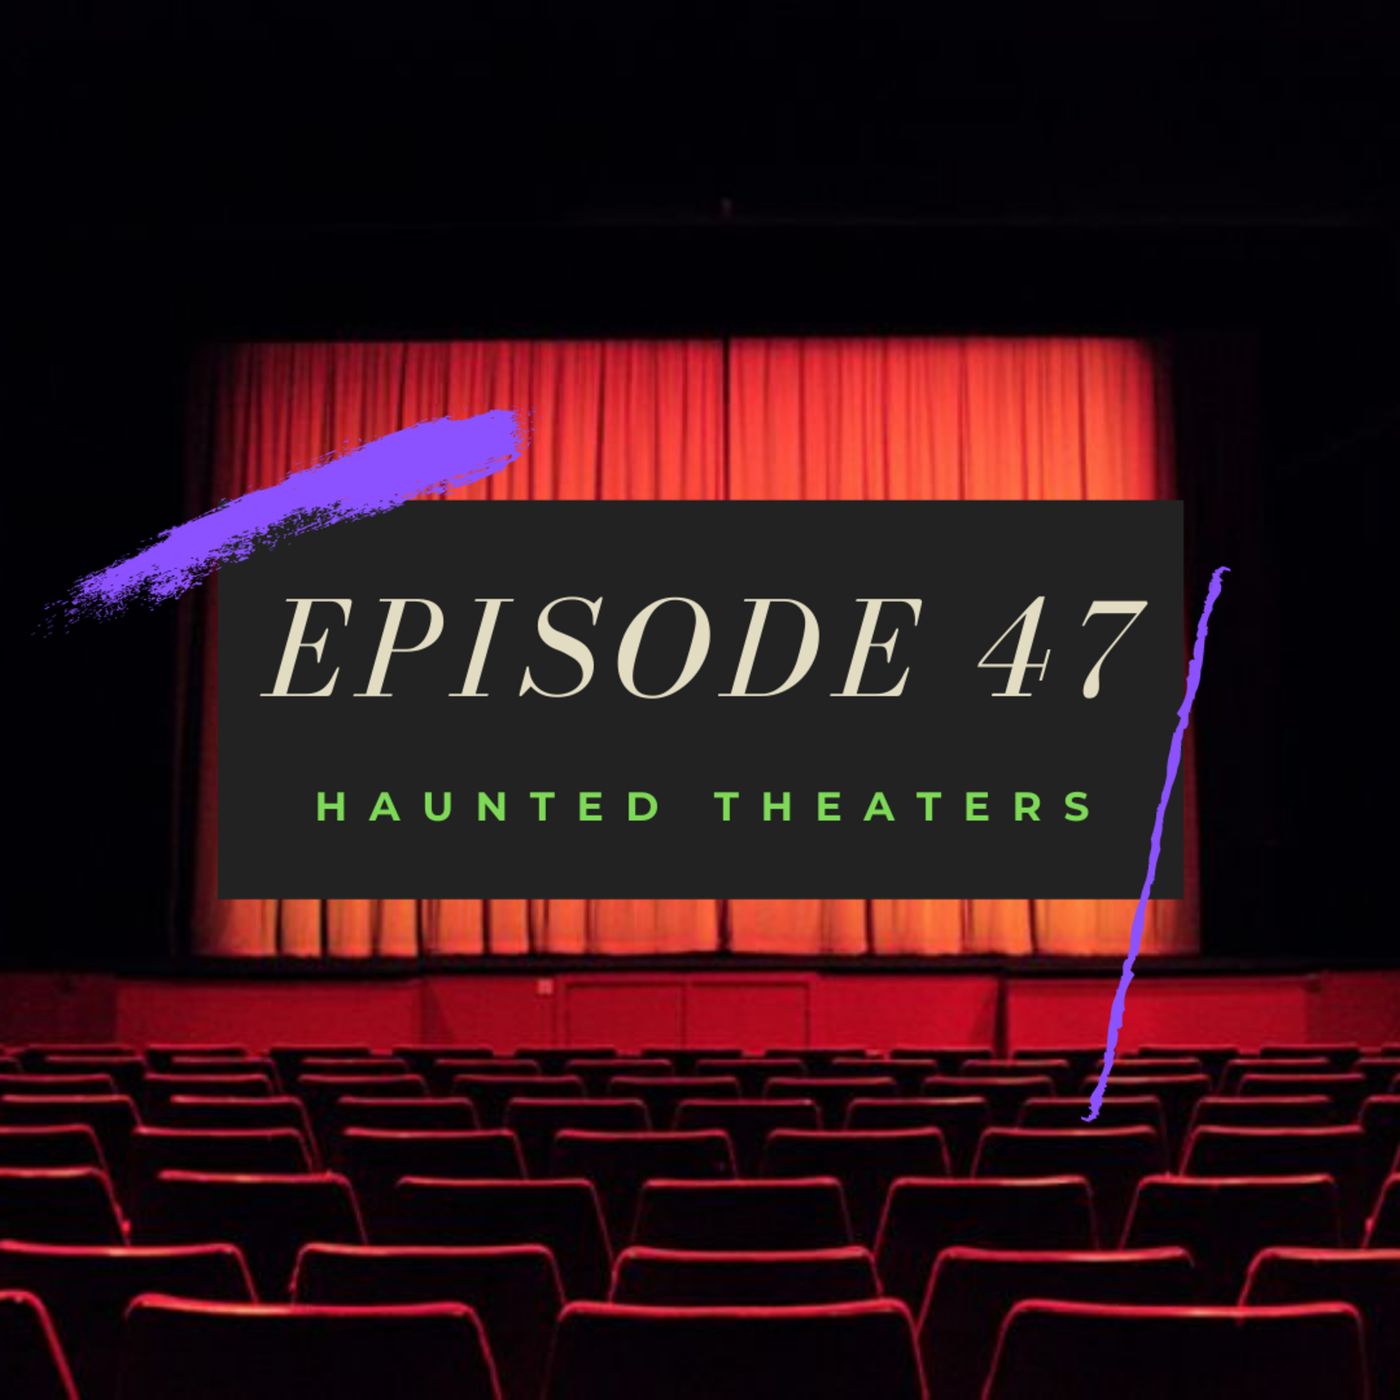 Ep. 47: Haunted Theaters Image